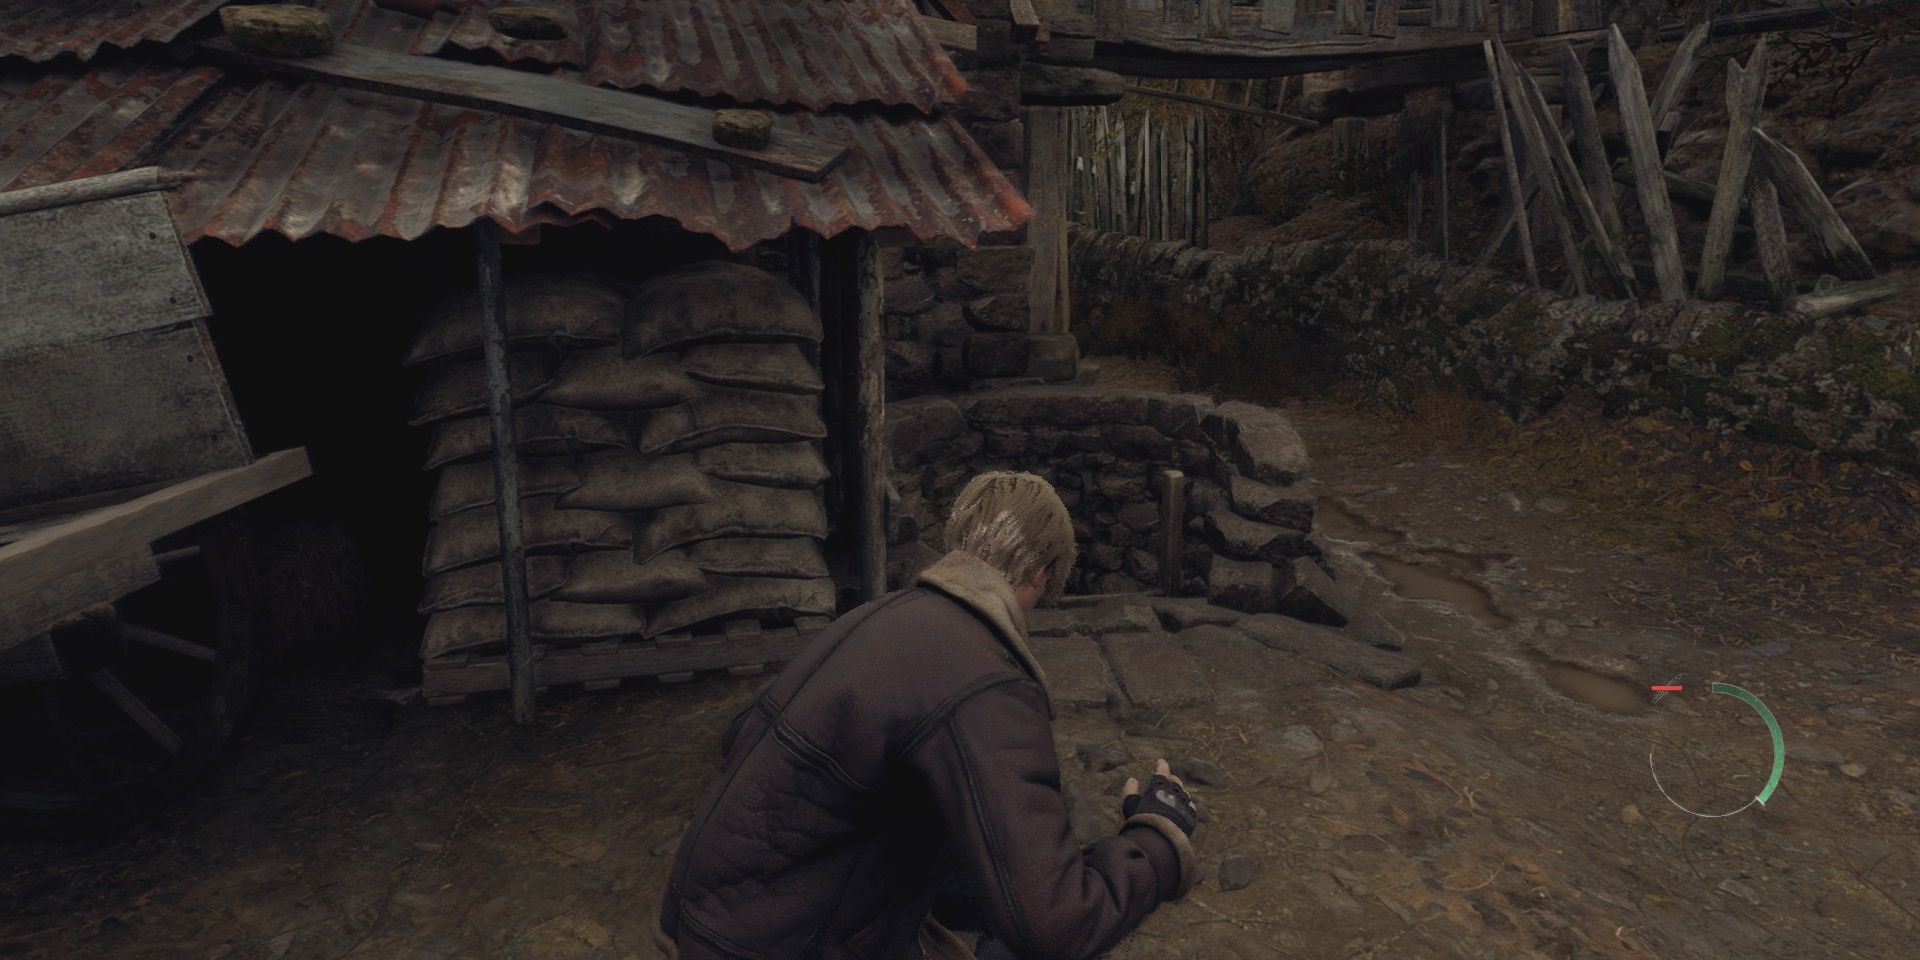 Leon standing in front of a well in the village in the Resident Evil 4 Chainsaw Demo.